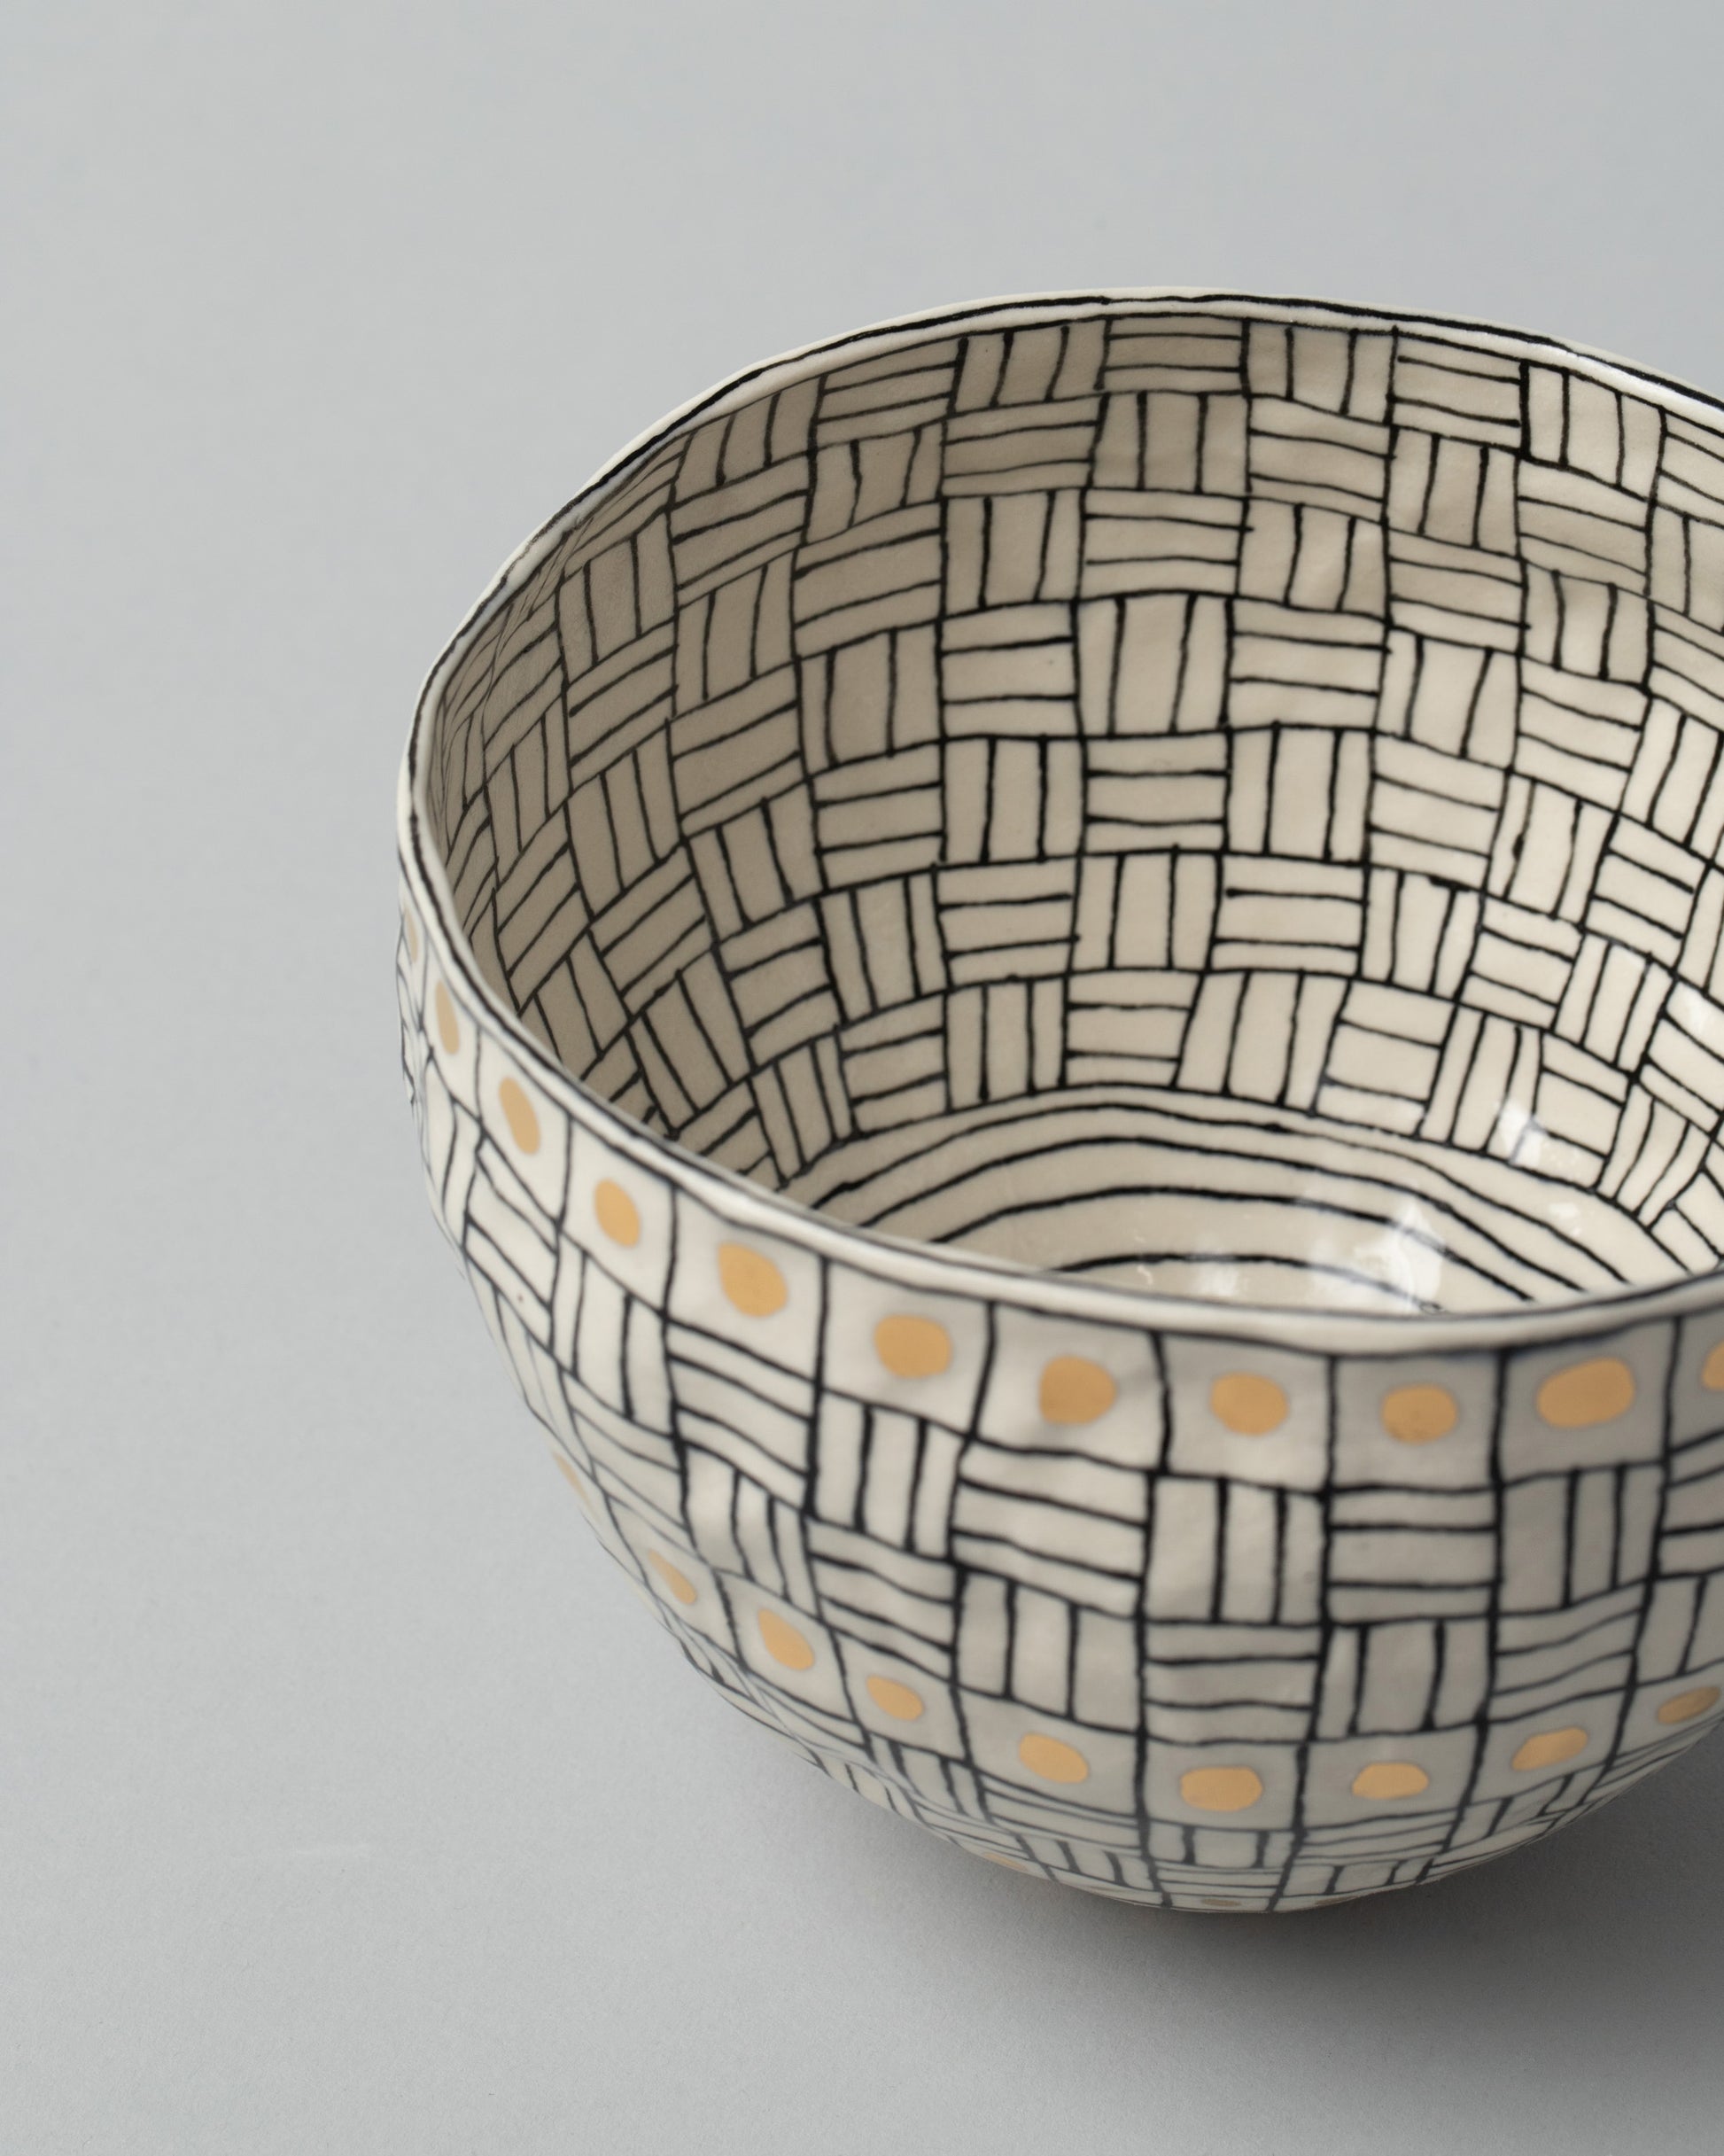 Closeup detail of the Suzanne Sullivan Three Pinch Bowl on light color background.